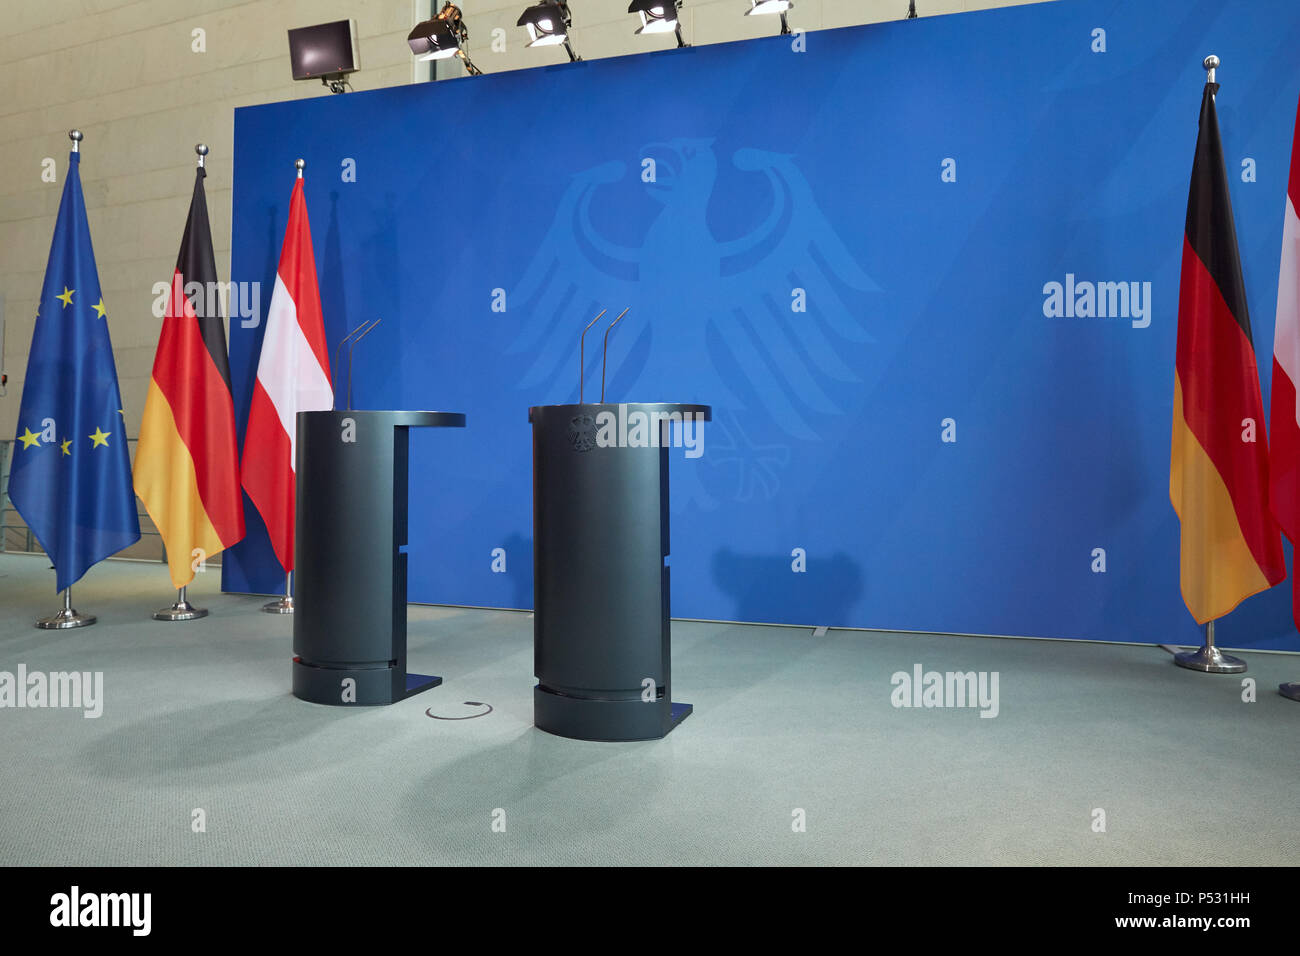 Berlin, Germany - logo wall, standing desks and the flags of Germany and Austria in the Chancellery Stock Photo